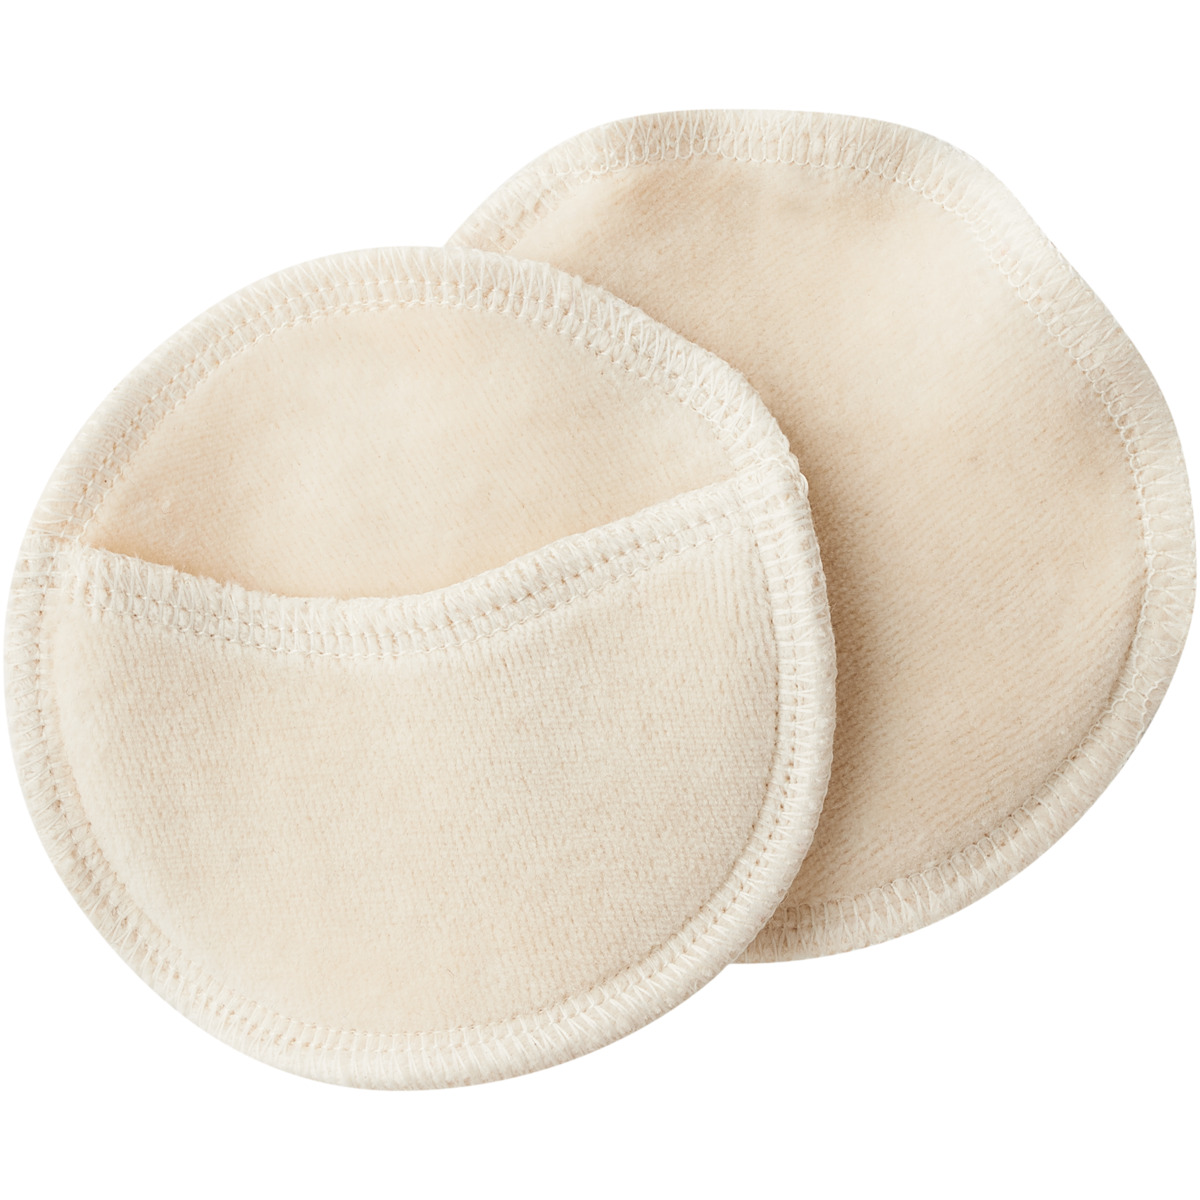 Beige Make-up removal pads, set of 7, INDIA